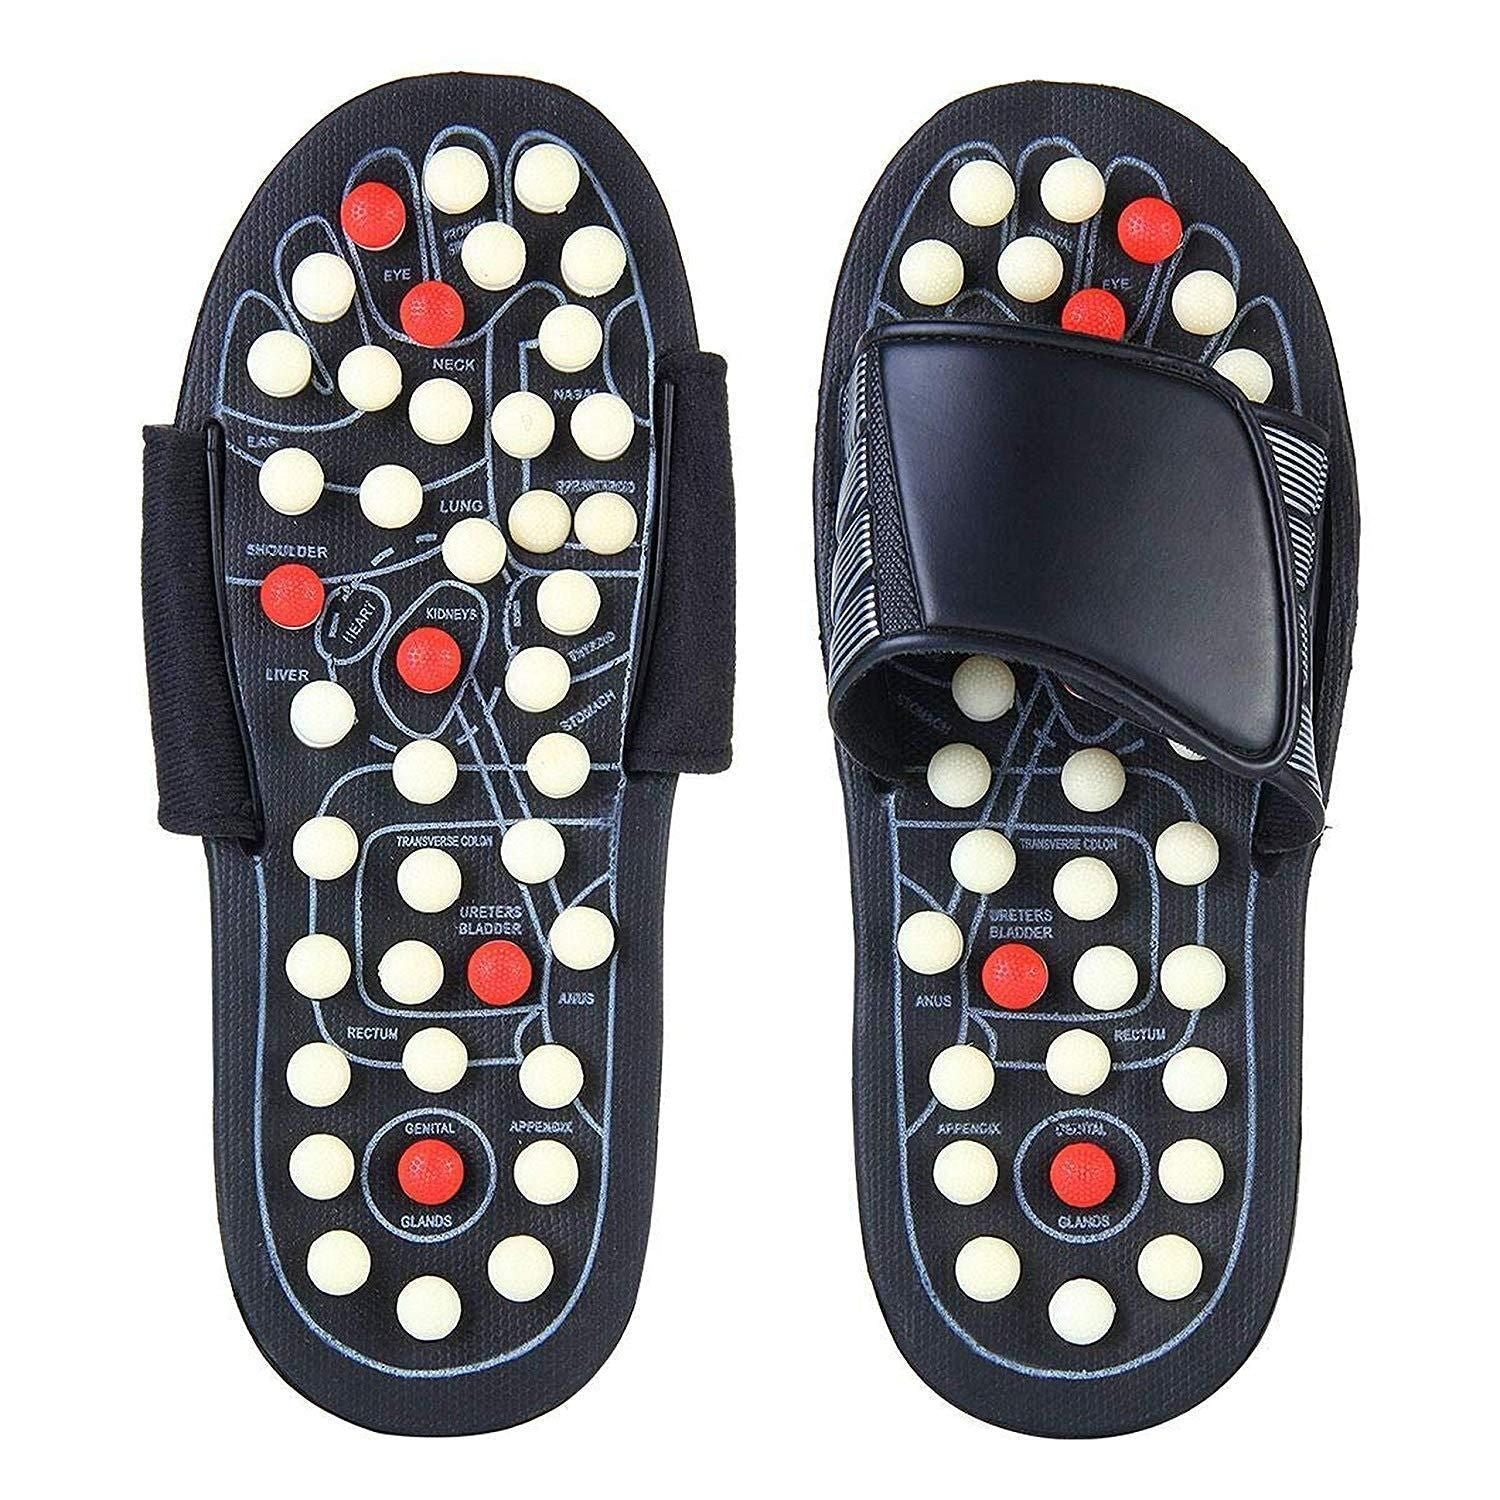 Spring Acupressure and Magnetic Therapy Accu Yoga Paduka - Deal IND.